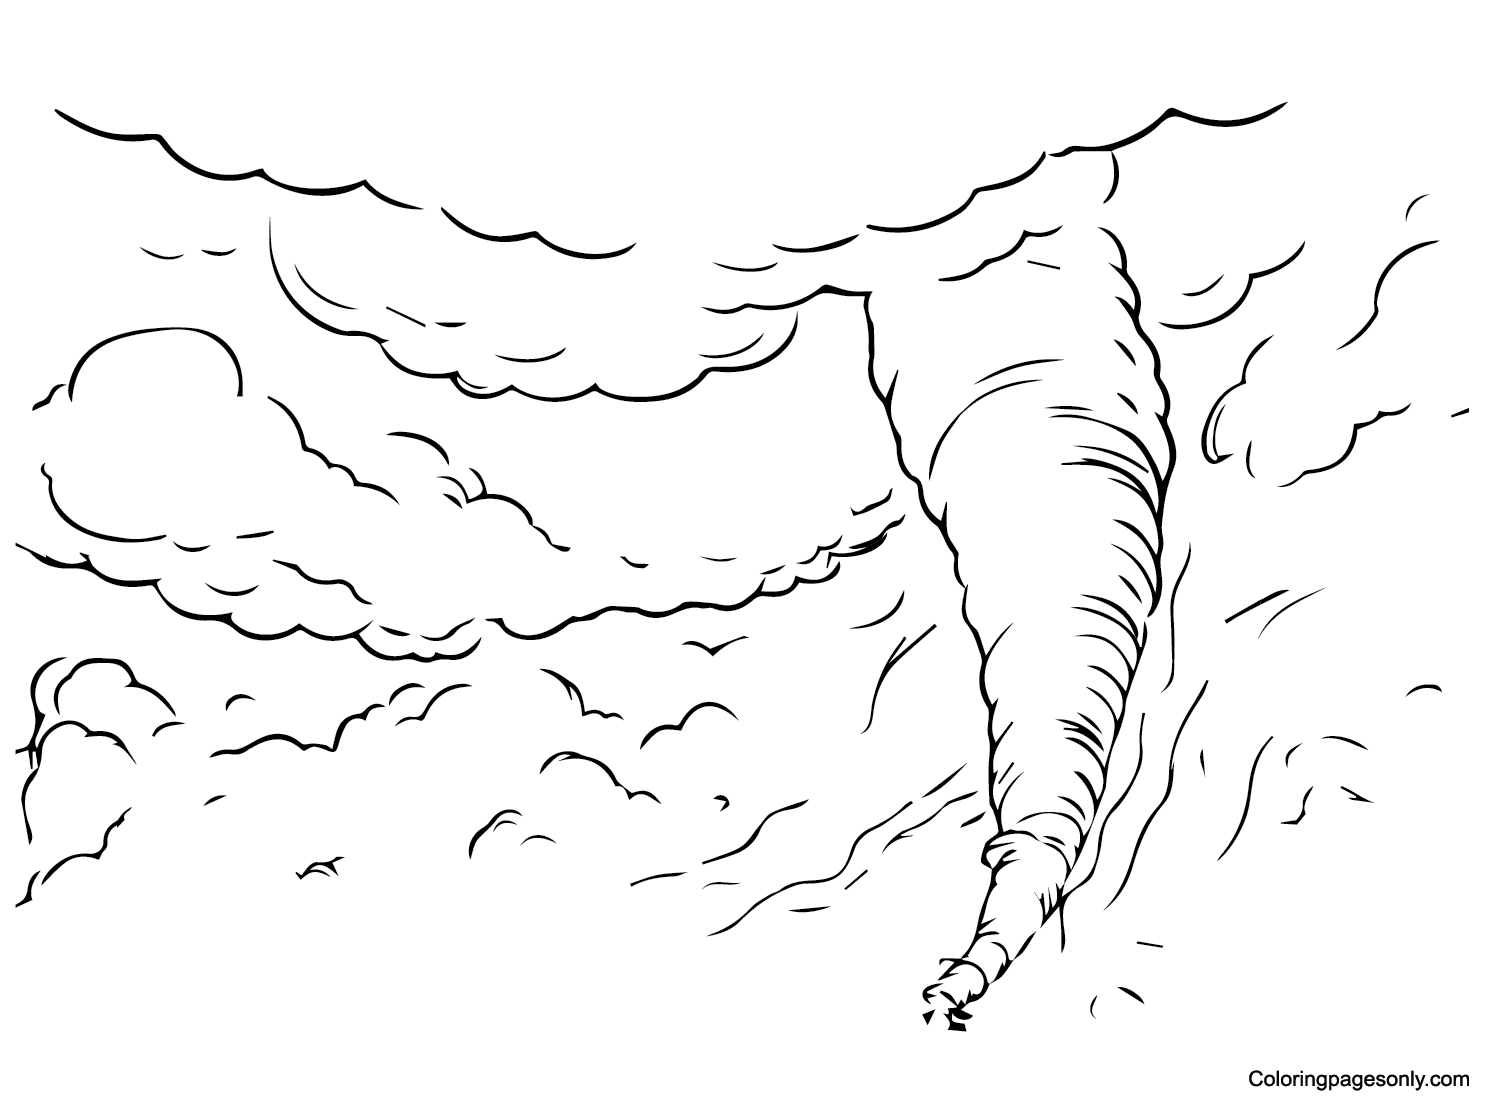 Tornado Coloring Pages Printable for Free Download